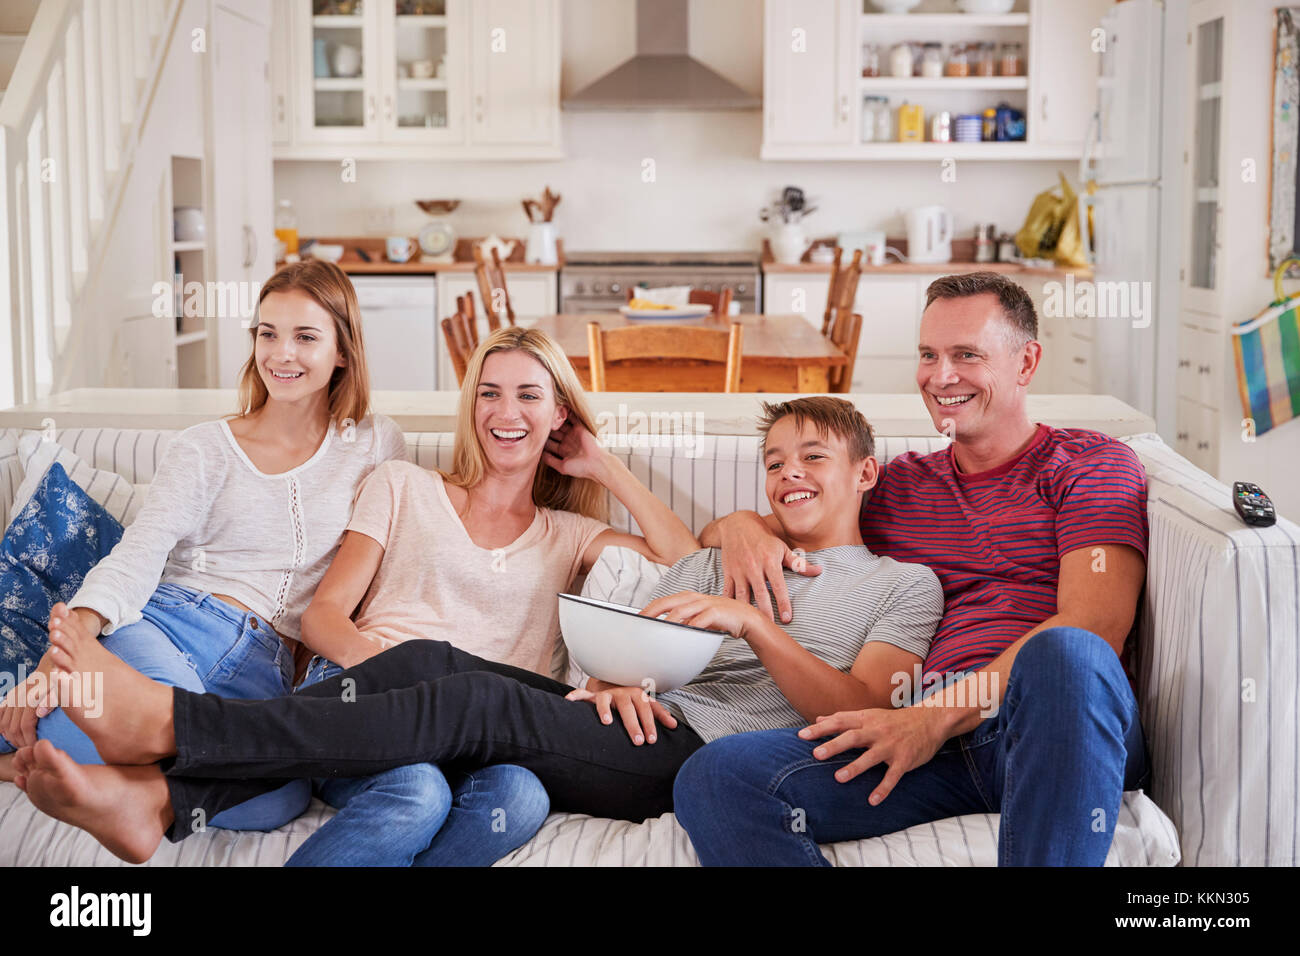 Family With Teenage Children Sitting On Sofa Watching TV Together Stock Photo